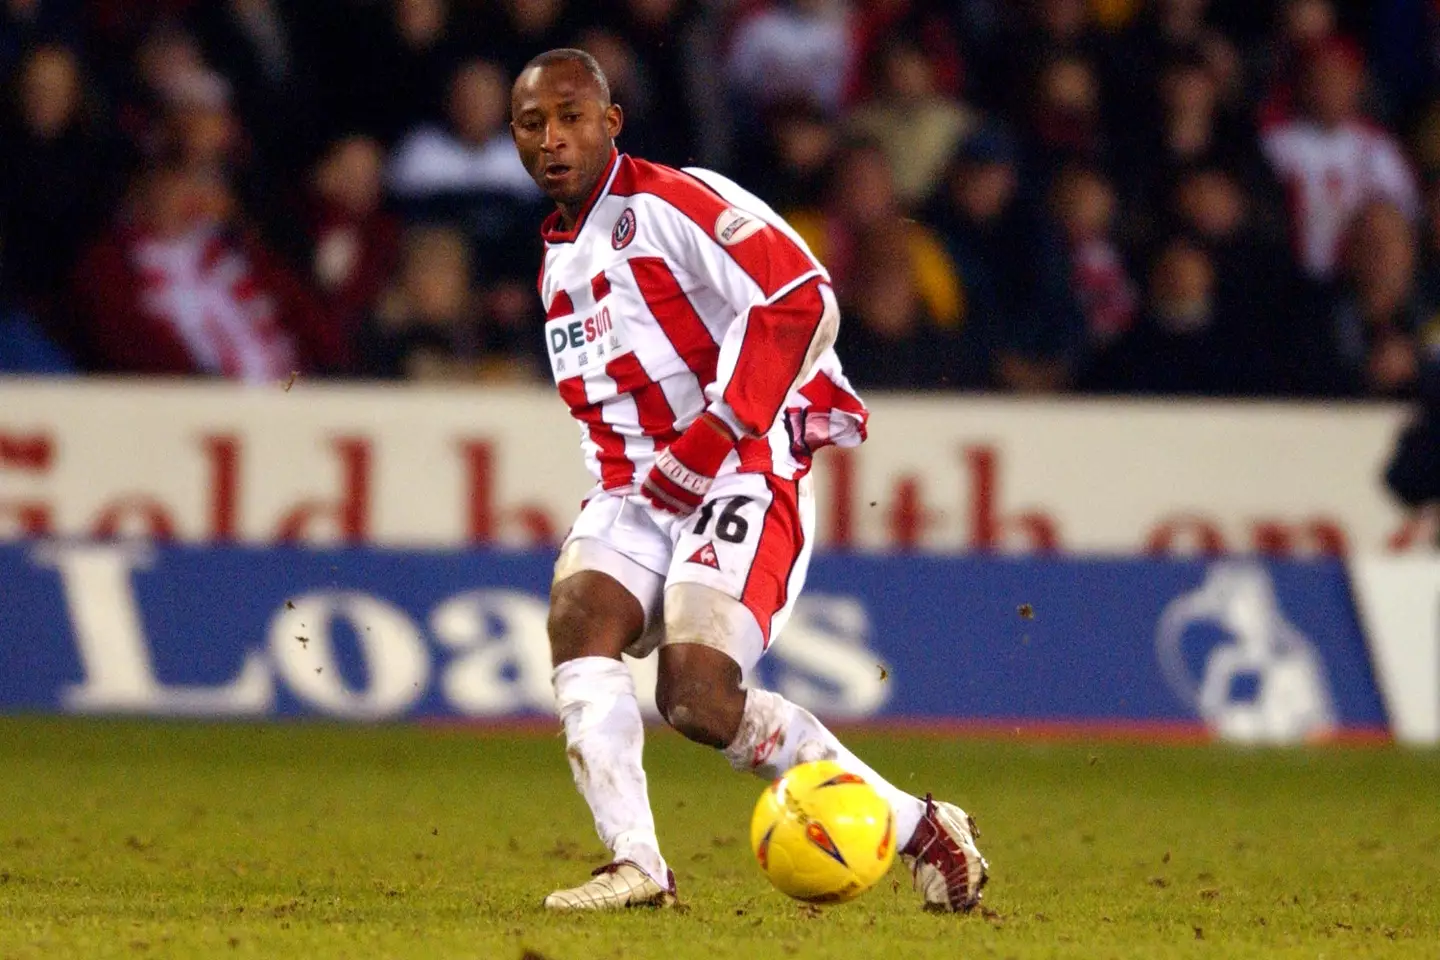 Ndlovu also turned out for Sheffield United.